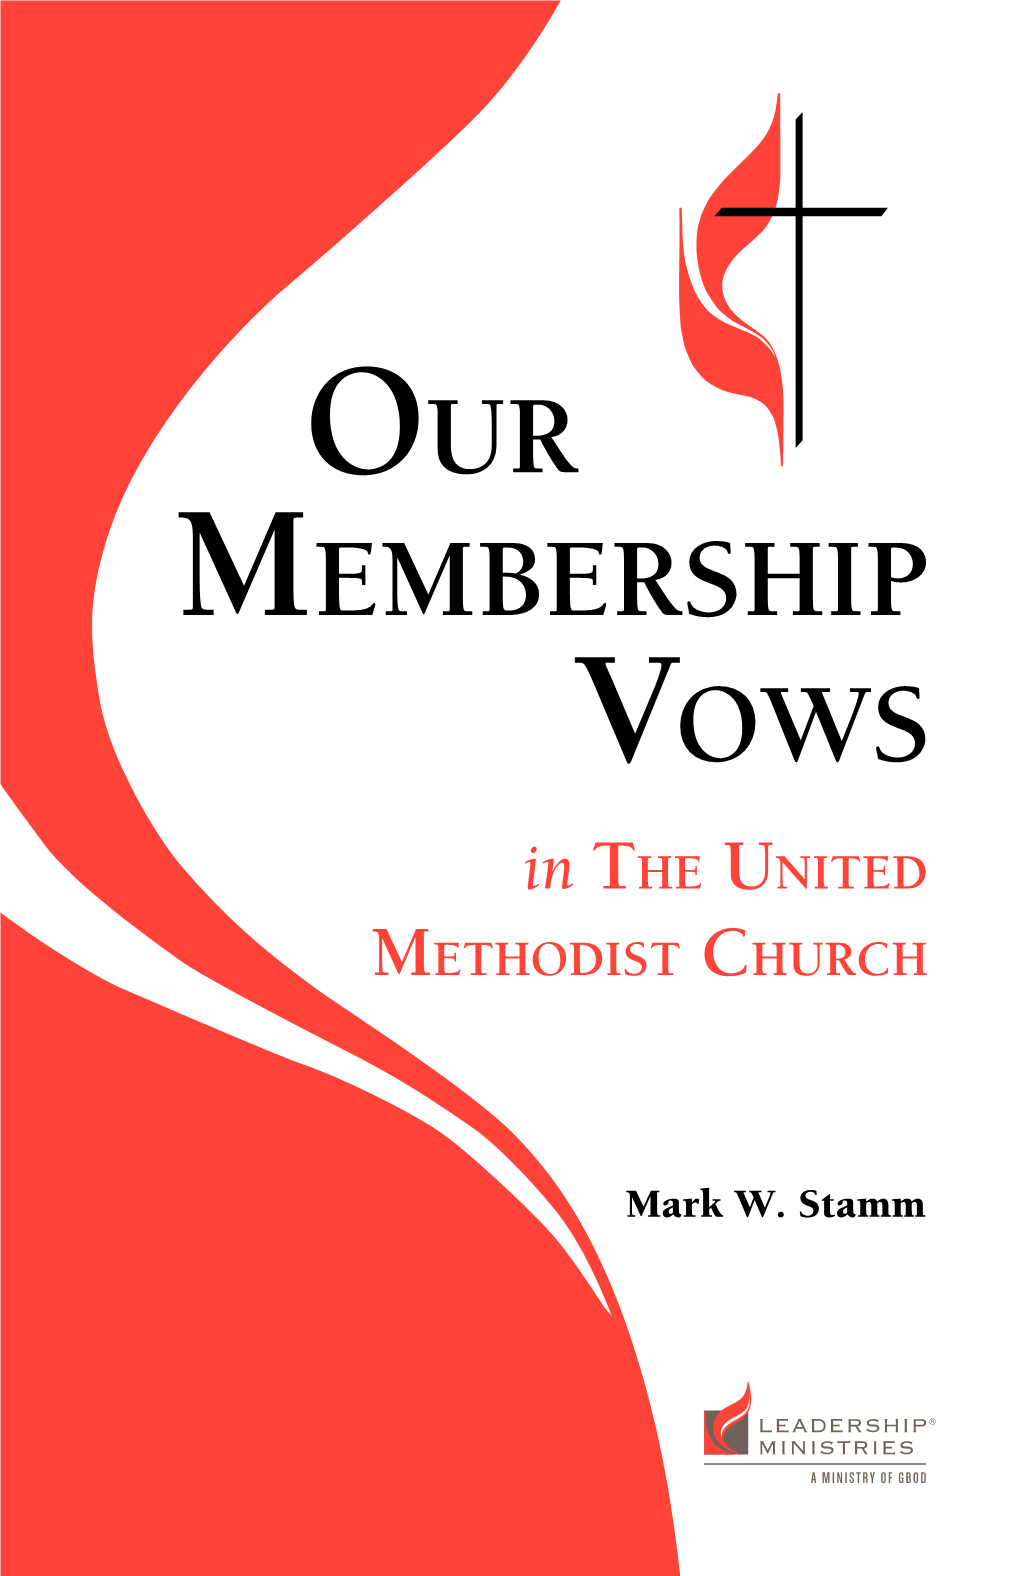 OUR MEMBERSHIP VOWS in the United Methodist Church